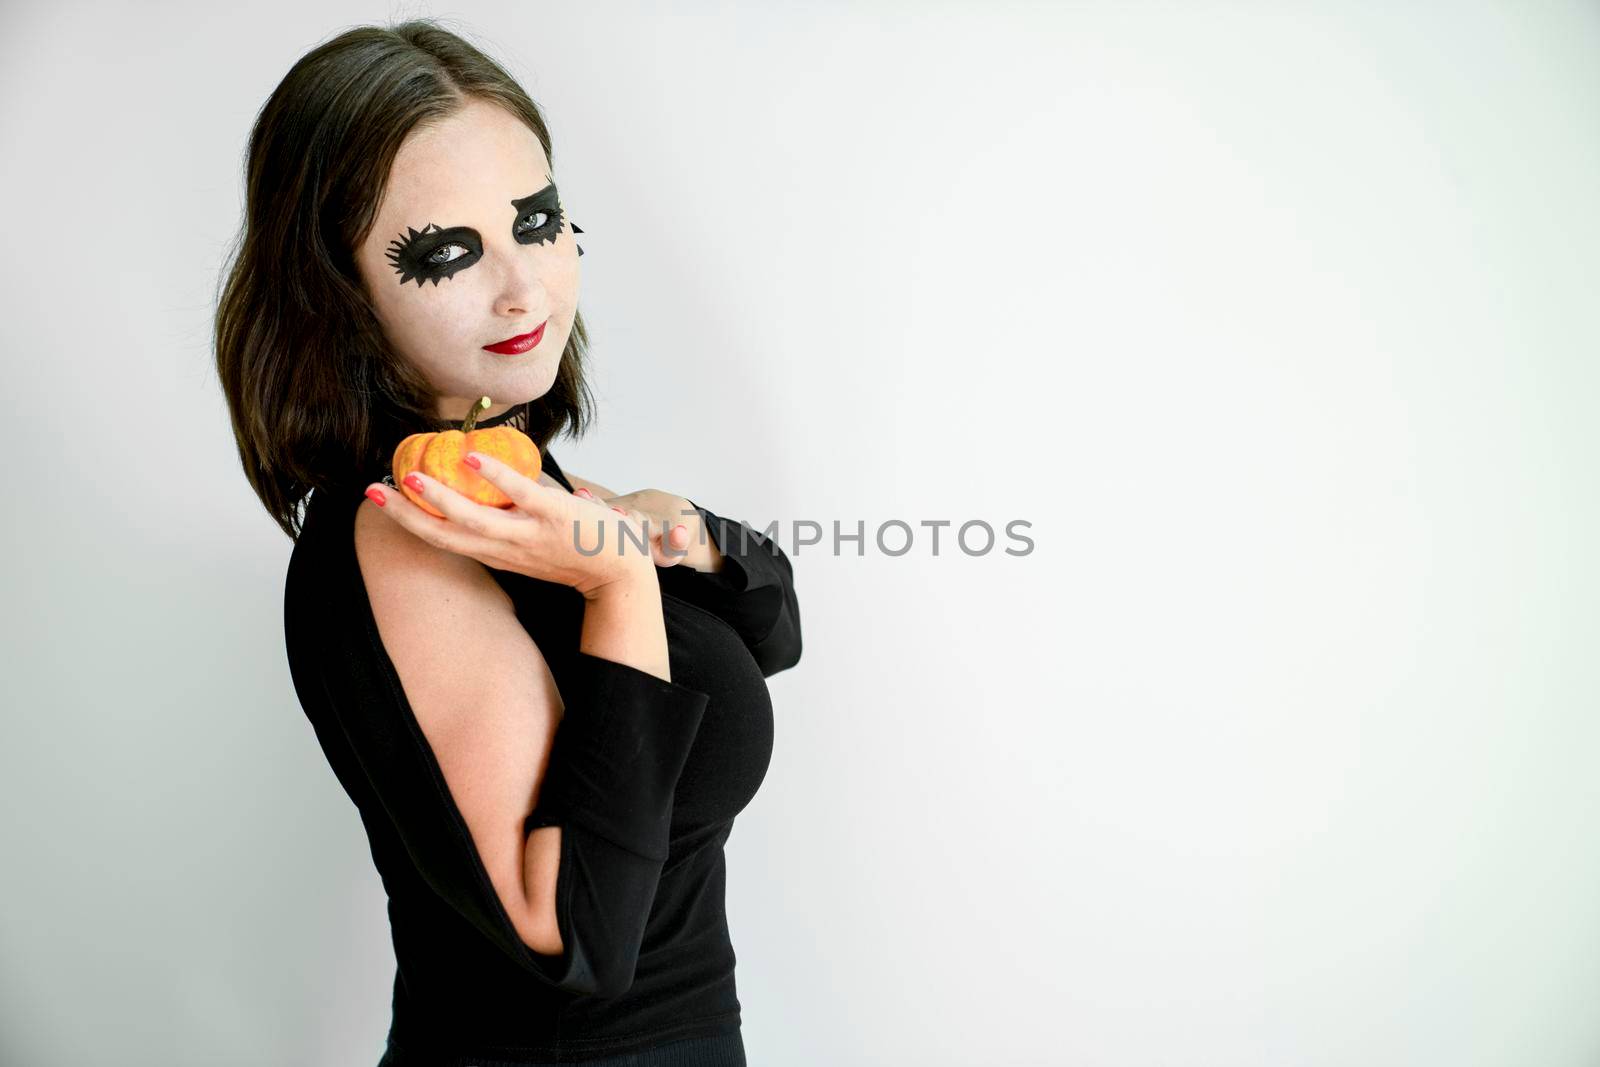 Girl with Halloween makeup on face holds pumpkin in hand on gray background. Copy space.